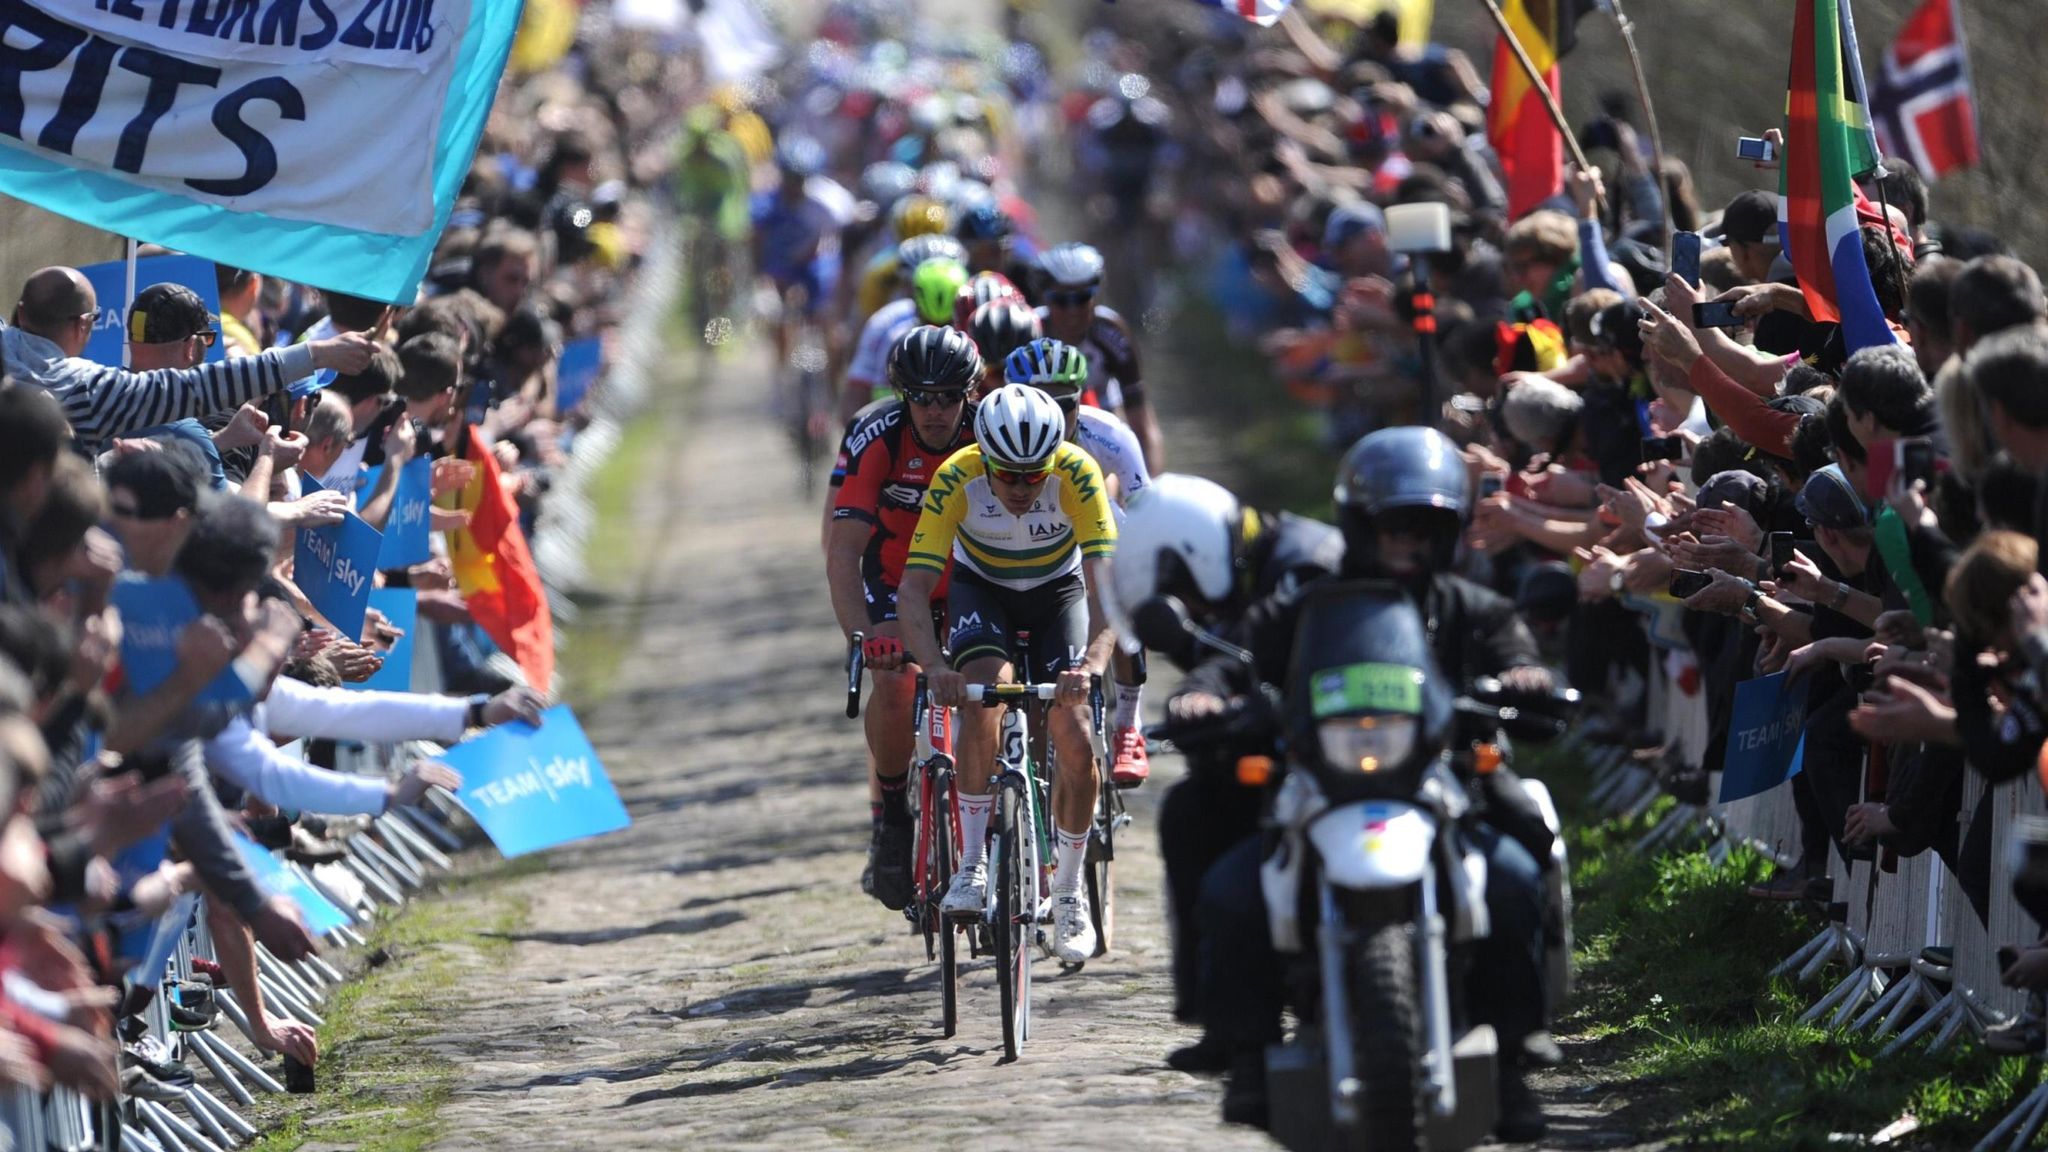 Paris-Roubaix, Tour of the Basque Country and Scheldeprijs all this week Cycling News Sky Sports